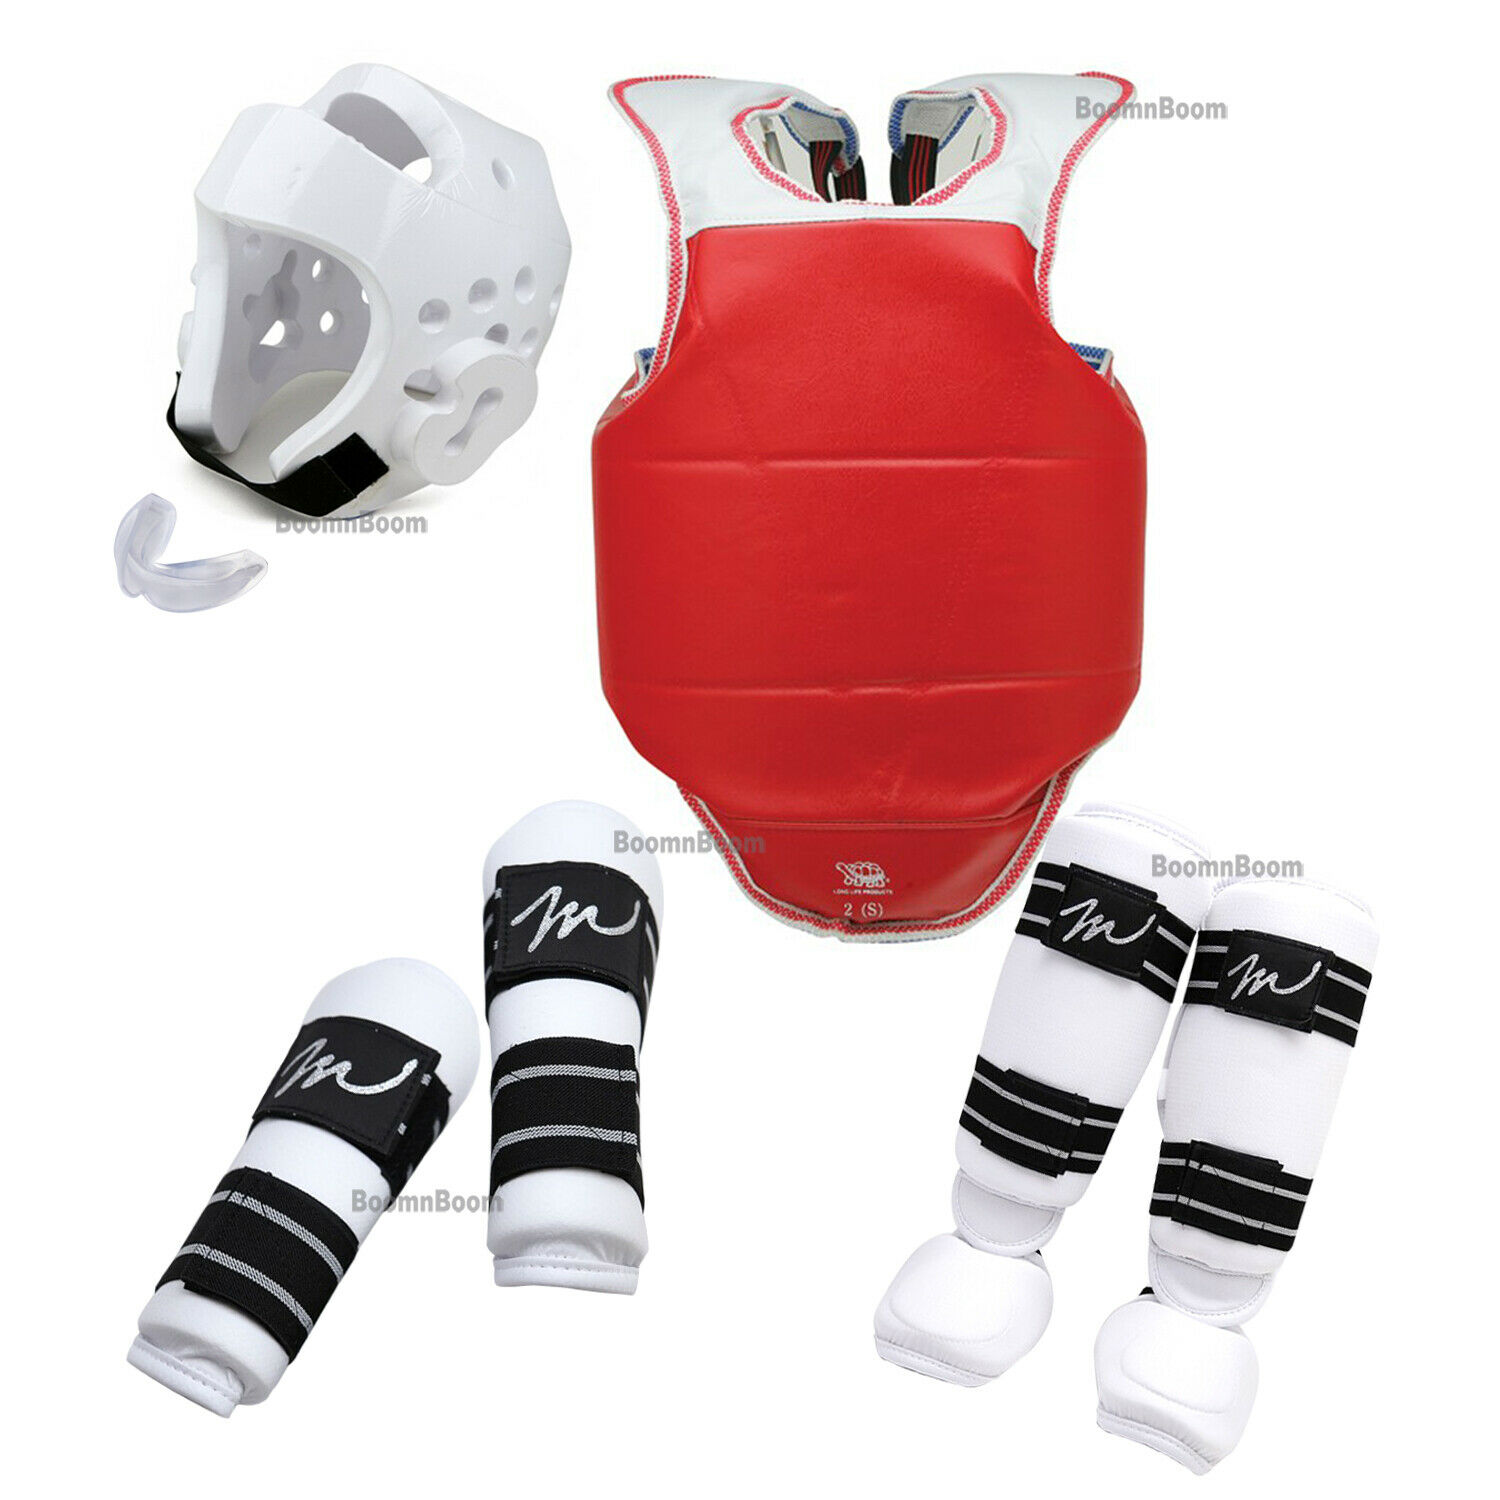 Taekwondo Sparring Gear Set Kid's 7 Pc Complete Deluxe Karate Protectors Guards